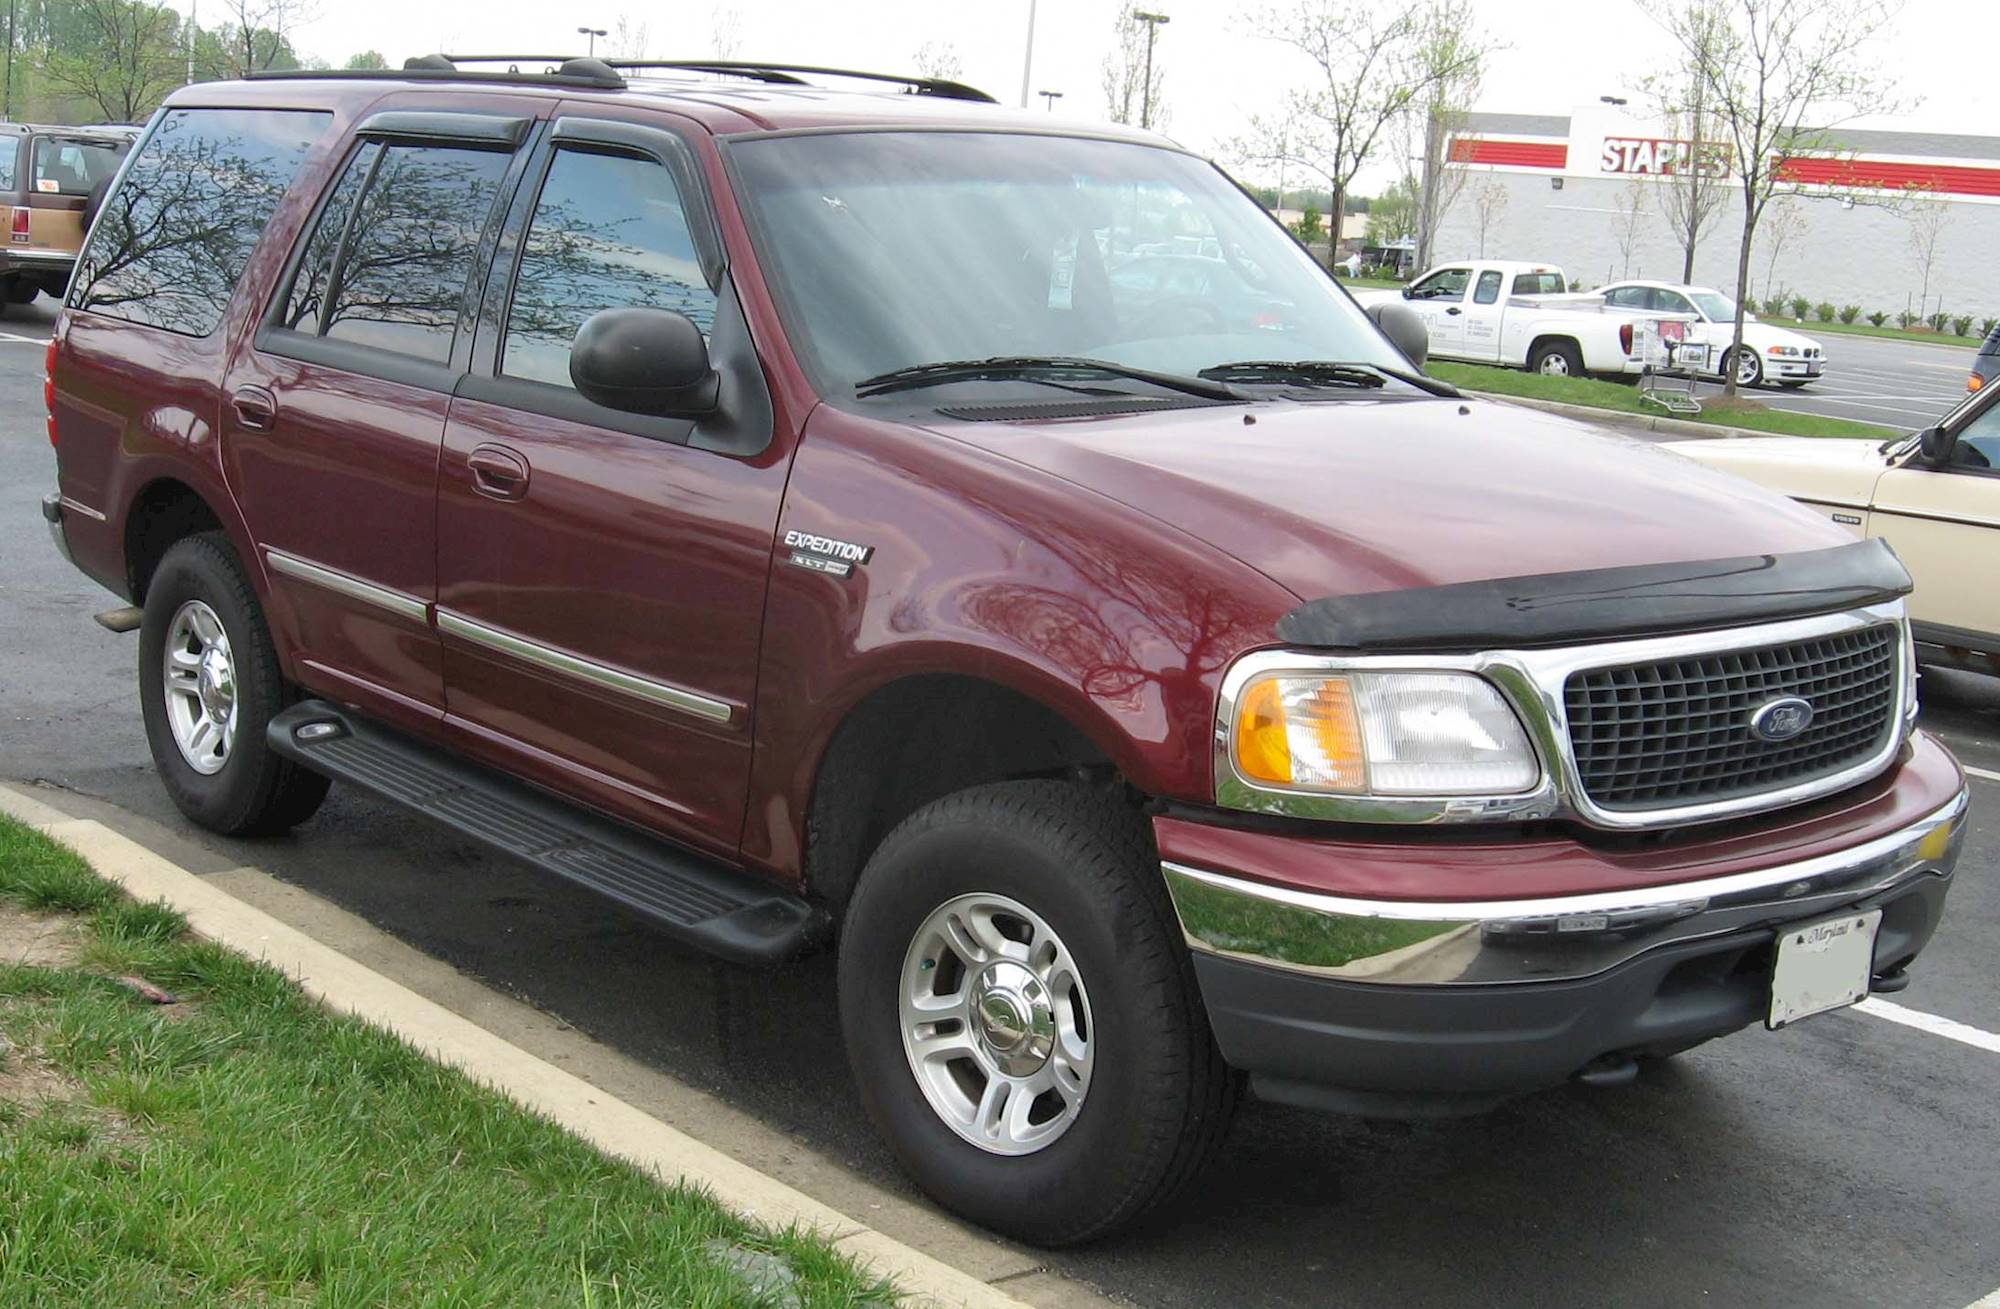 1999 Ford Expedition XLT - 4dr SUV 4.6L V8 4x4 auto